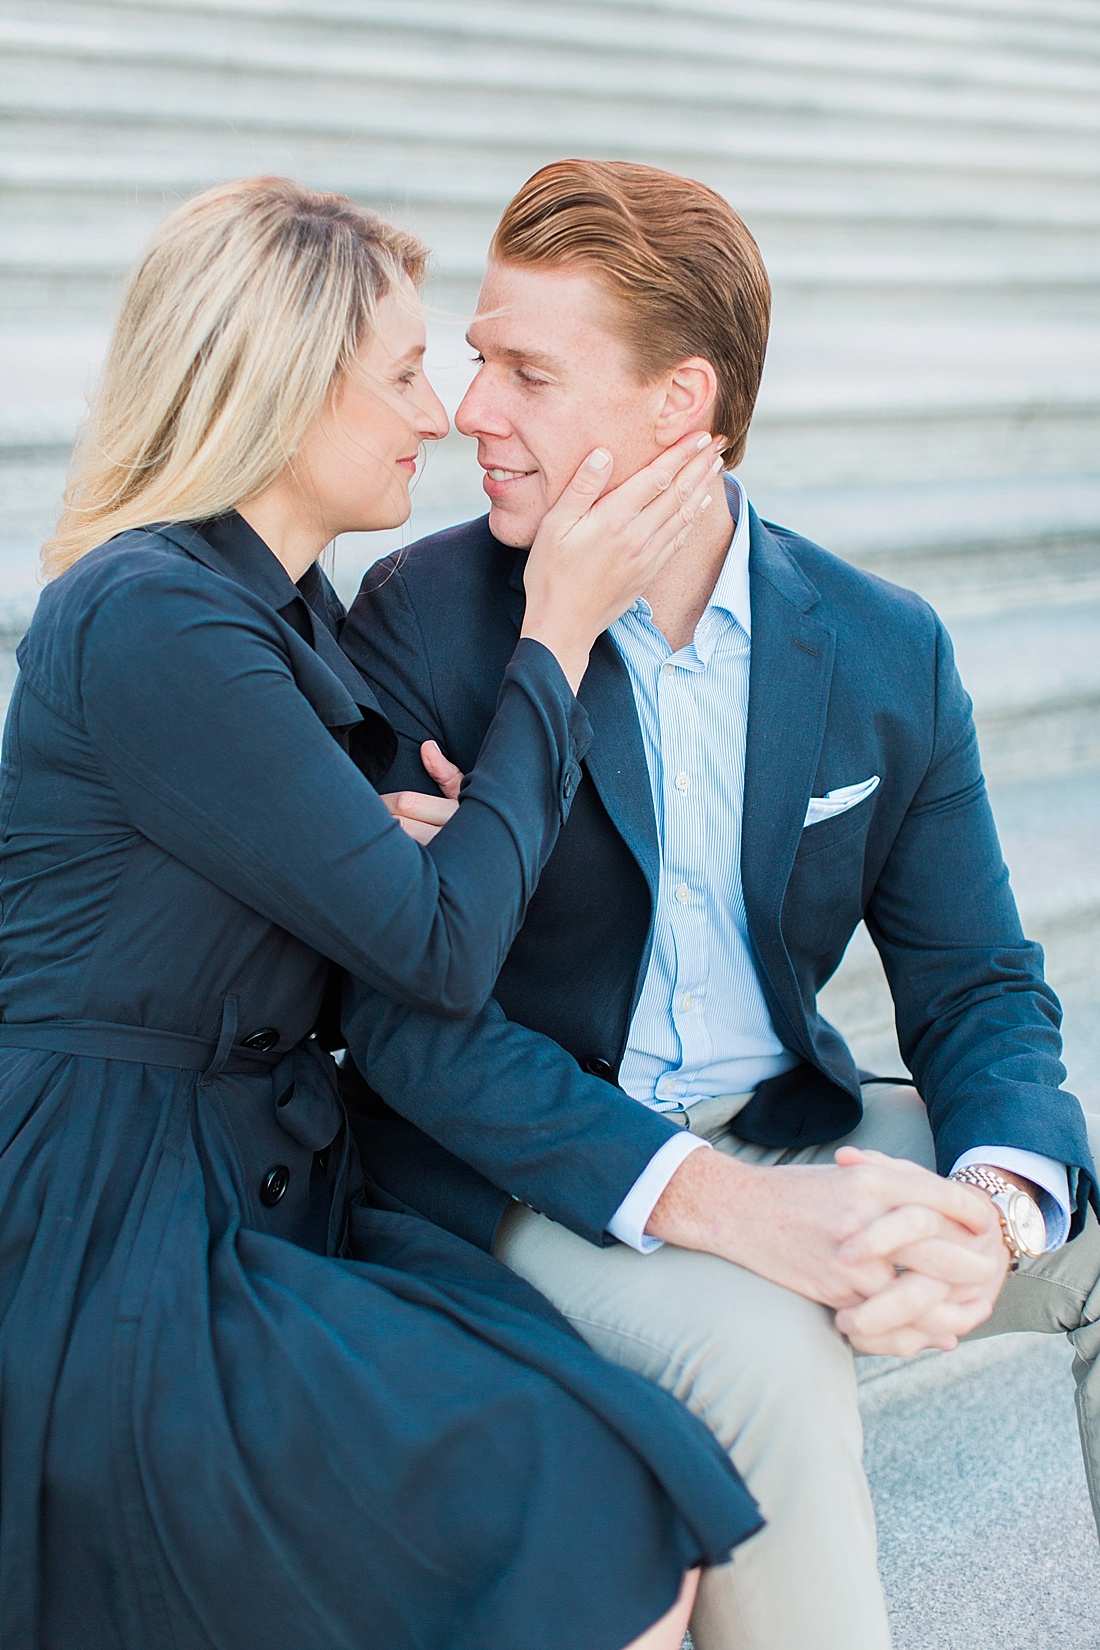 Capitol Hill engagement session | Abby Grace Photography